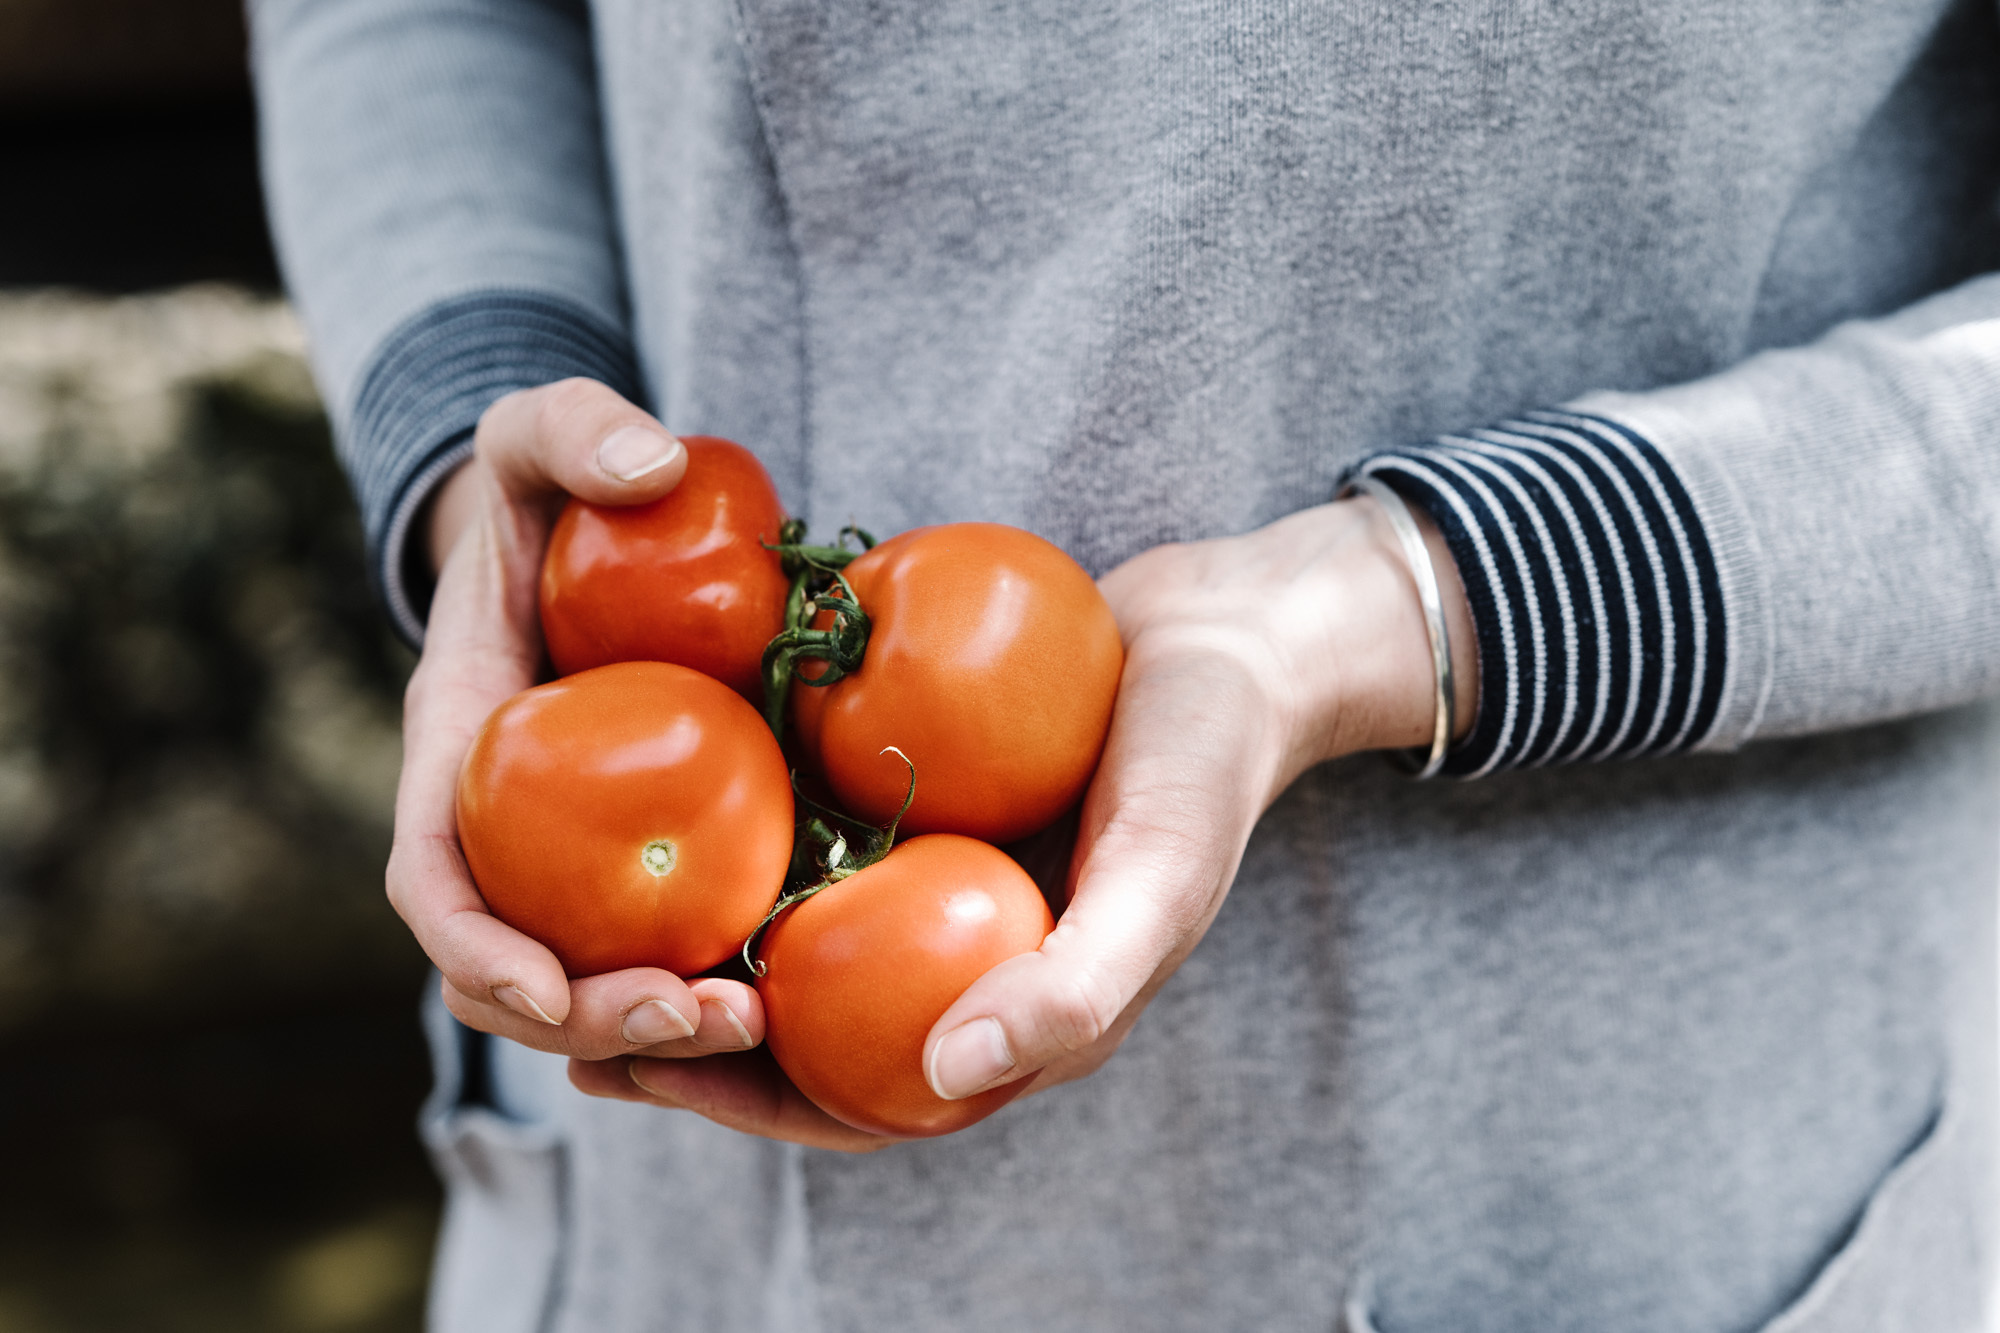 woman holding tomatoes - does diet affect fertility? monash ivf